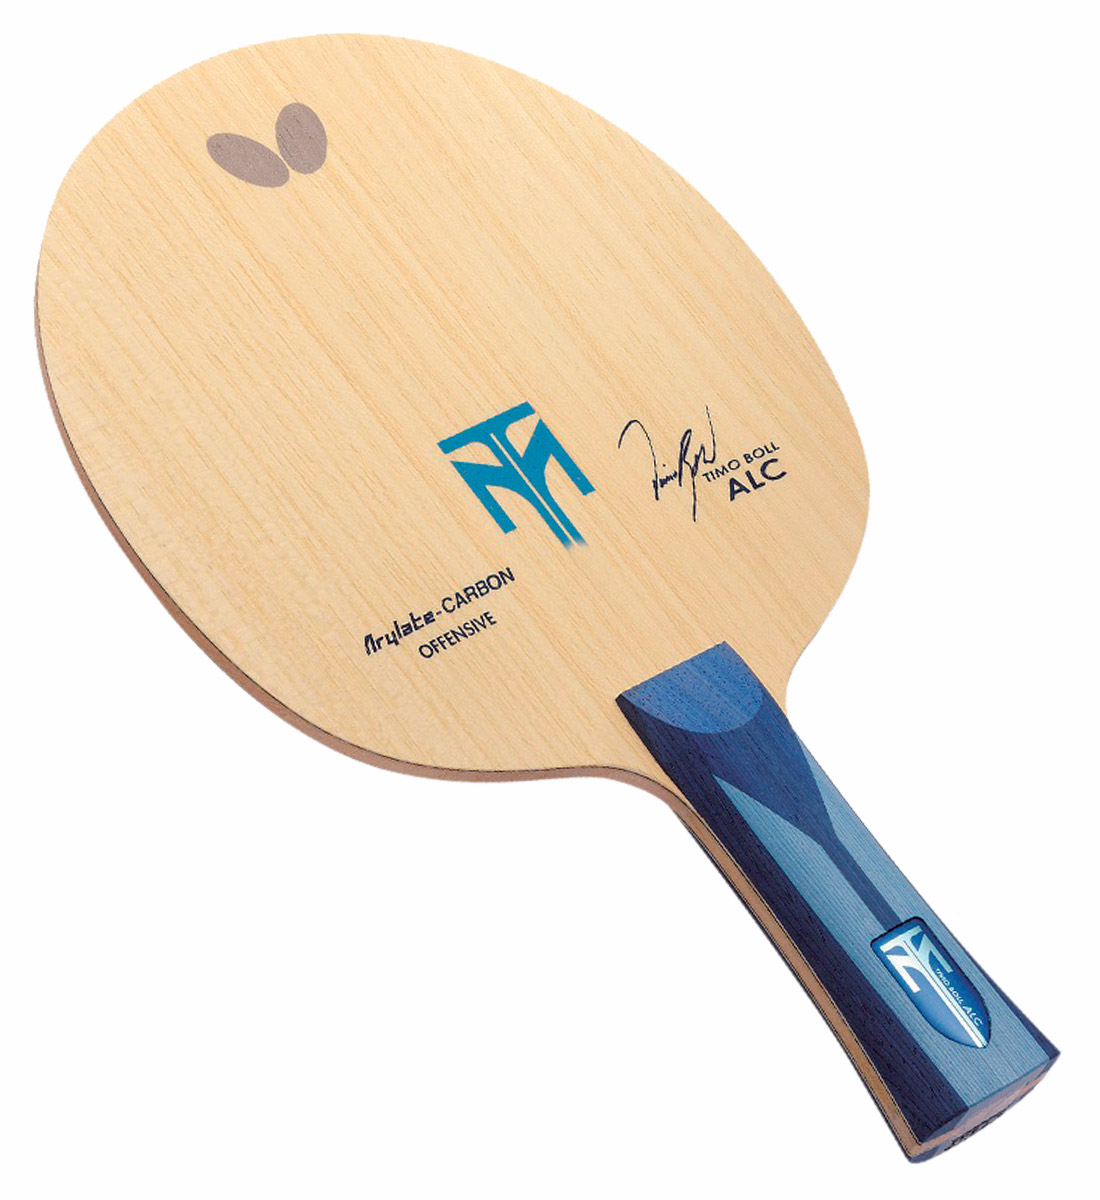 What is the best ALC table tennis blade?